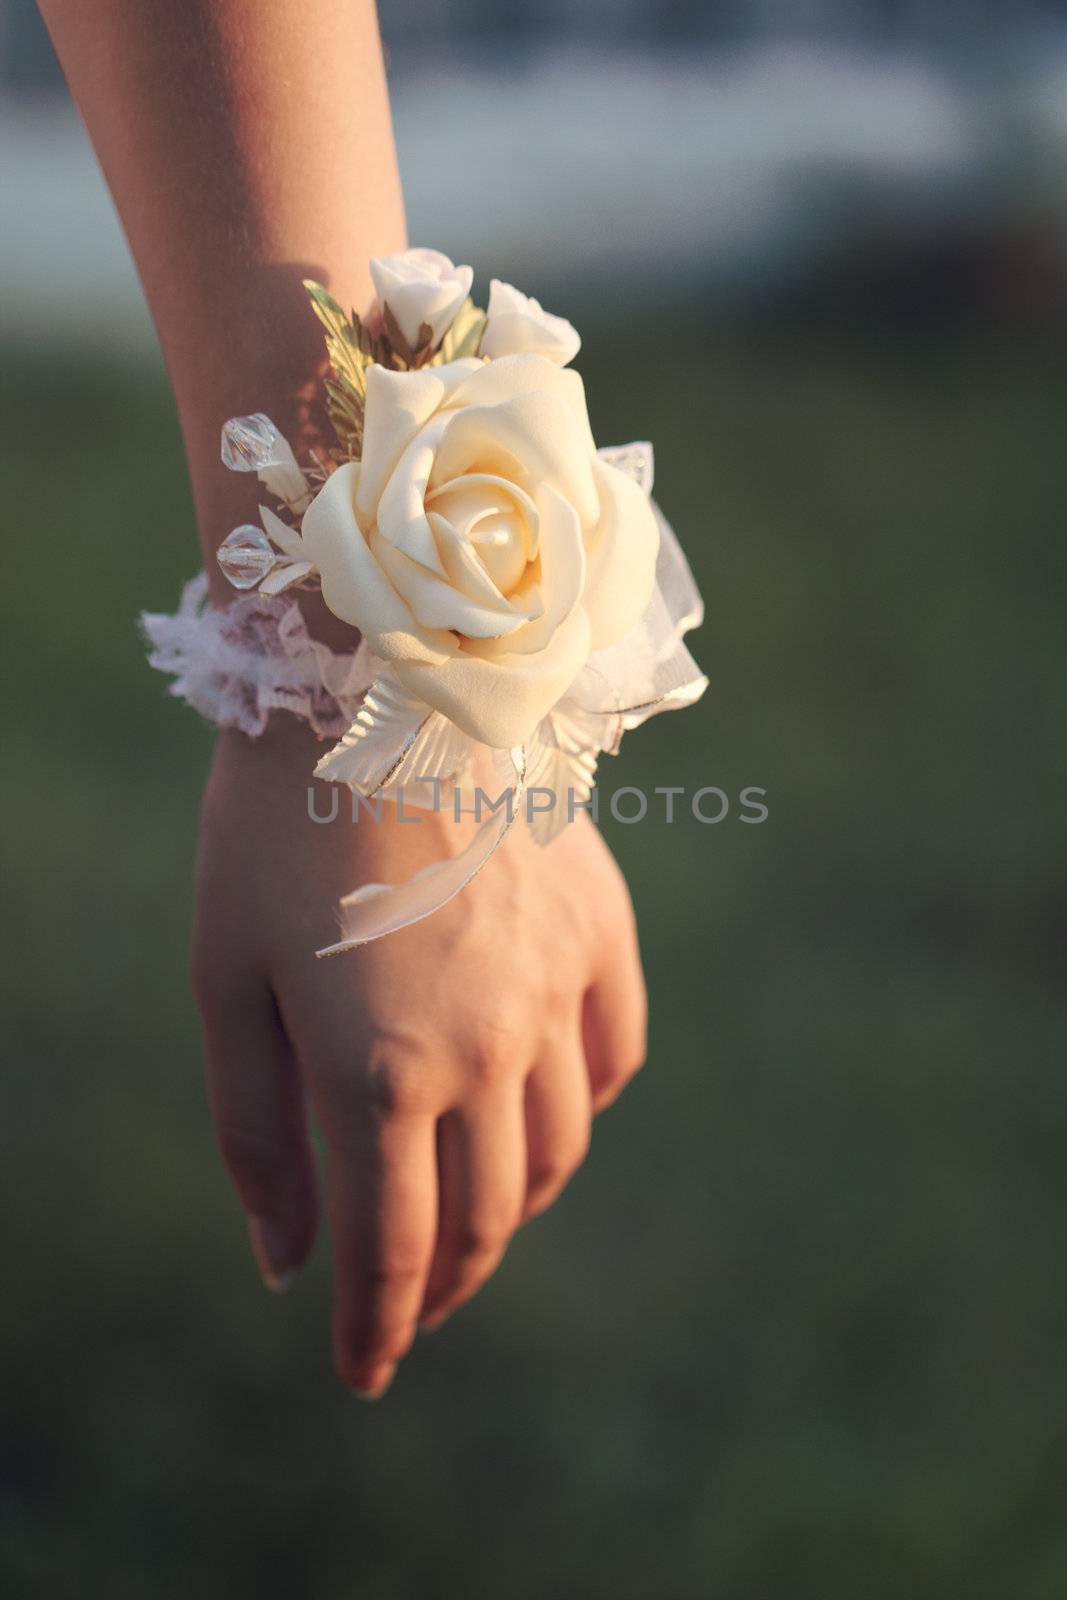 Flower on hand of the bridesmaids by victosha